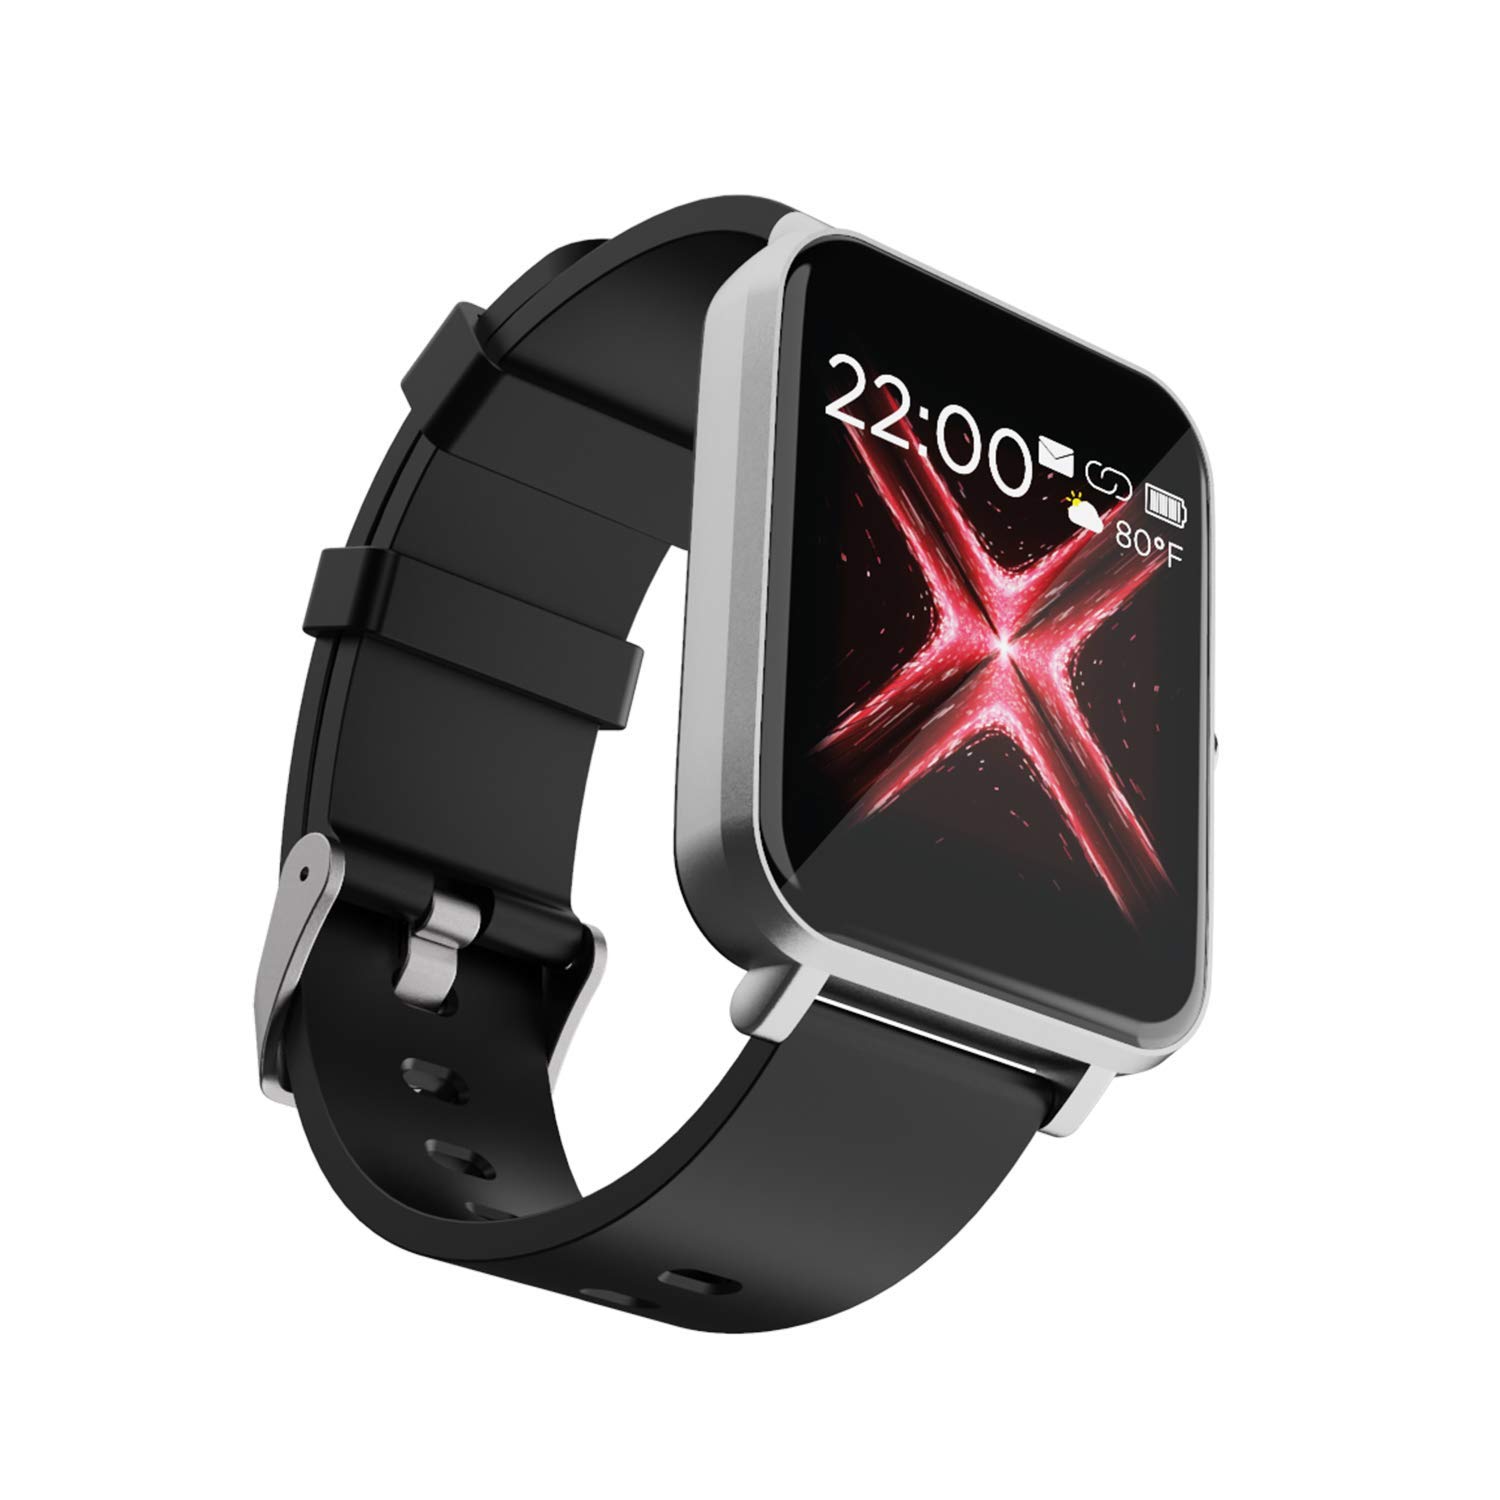 BoAt Enigma Smart Watch Price in India, Features, Launch Date ...